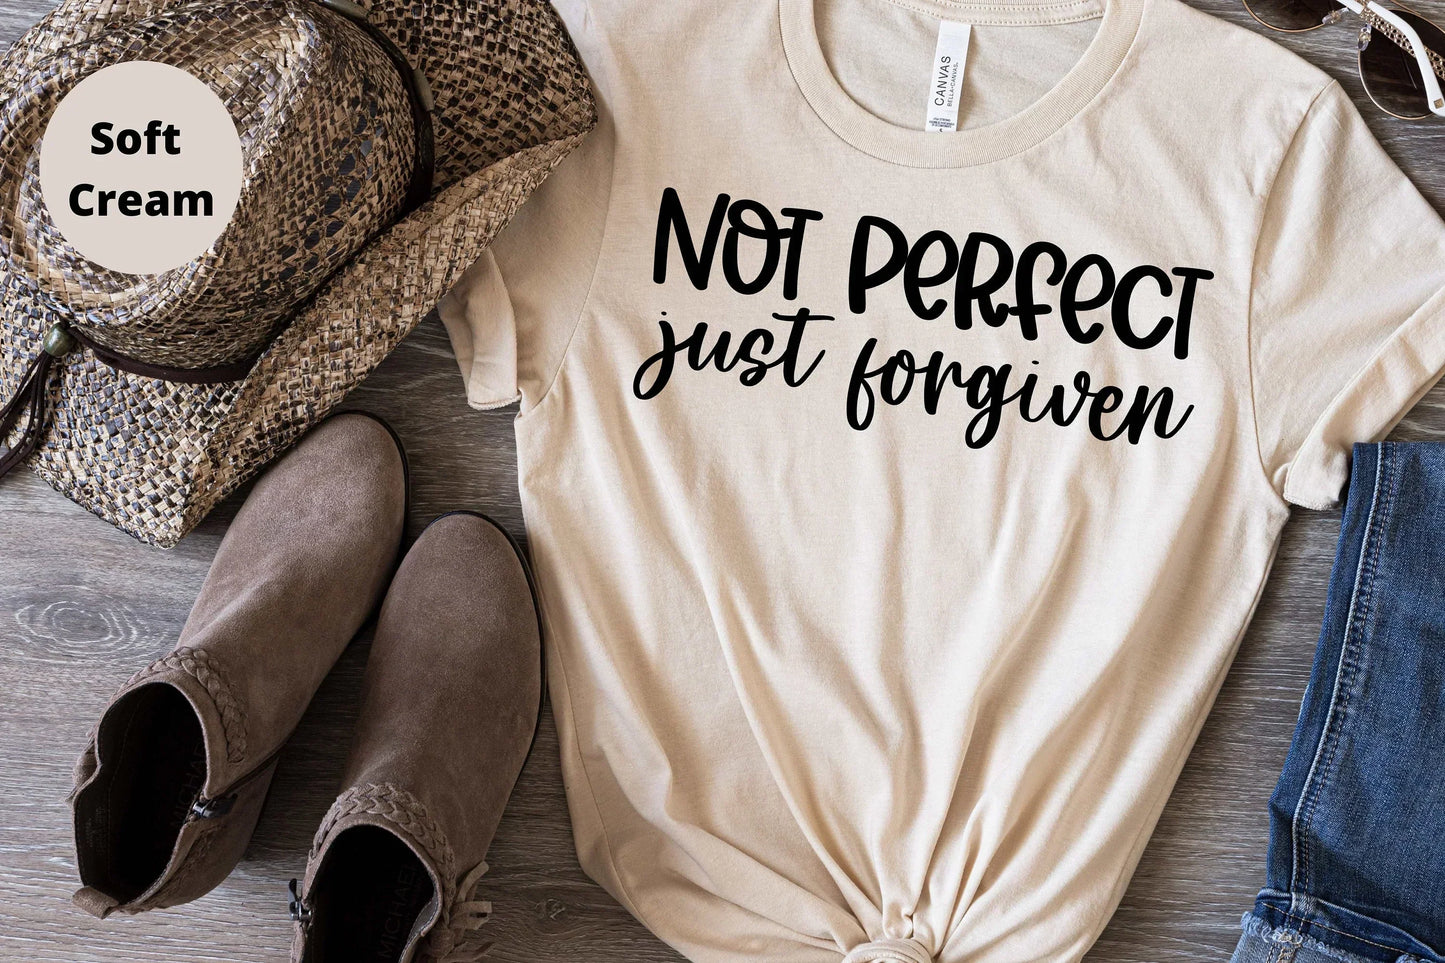 Not Perfect Just Forgiven, Christian Shirt about Jesus